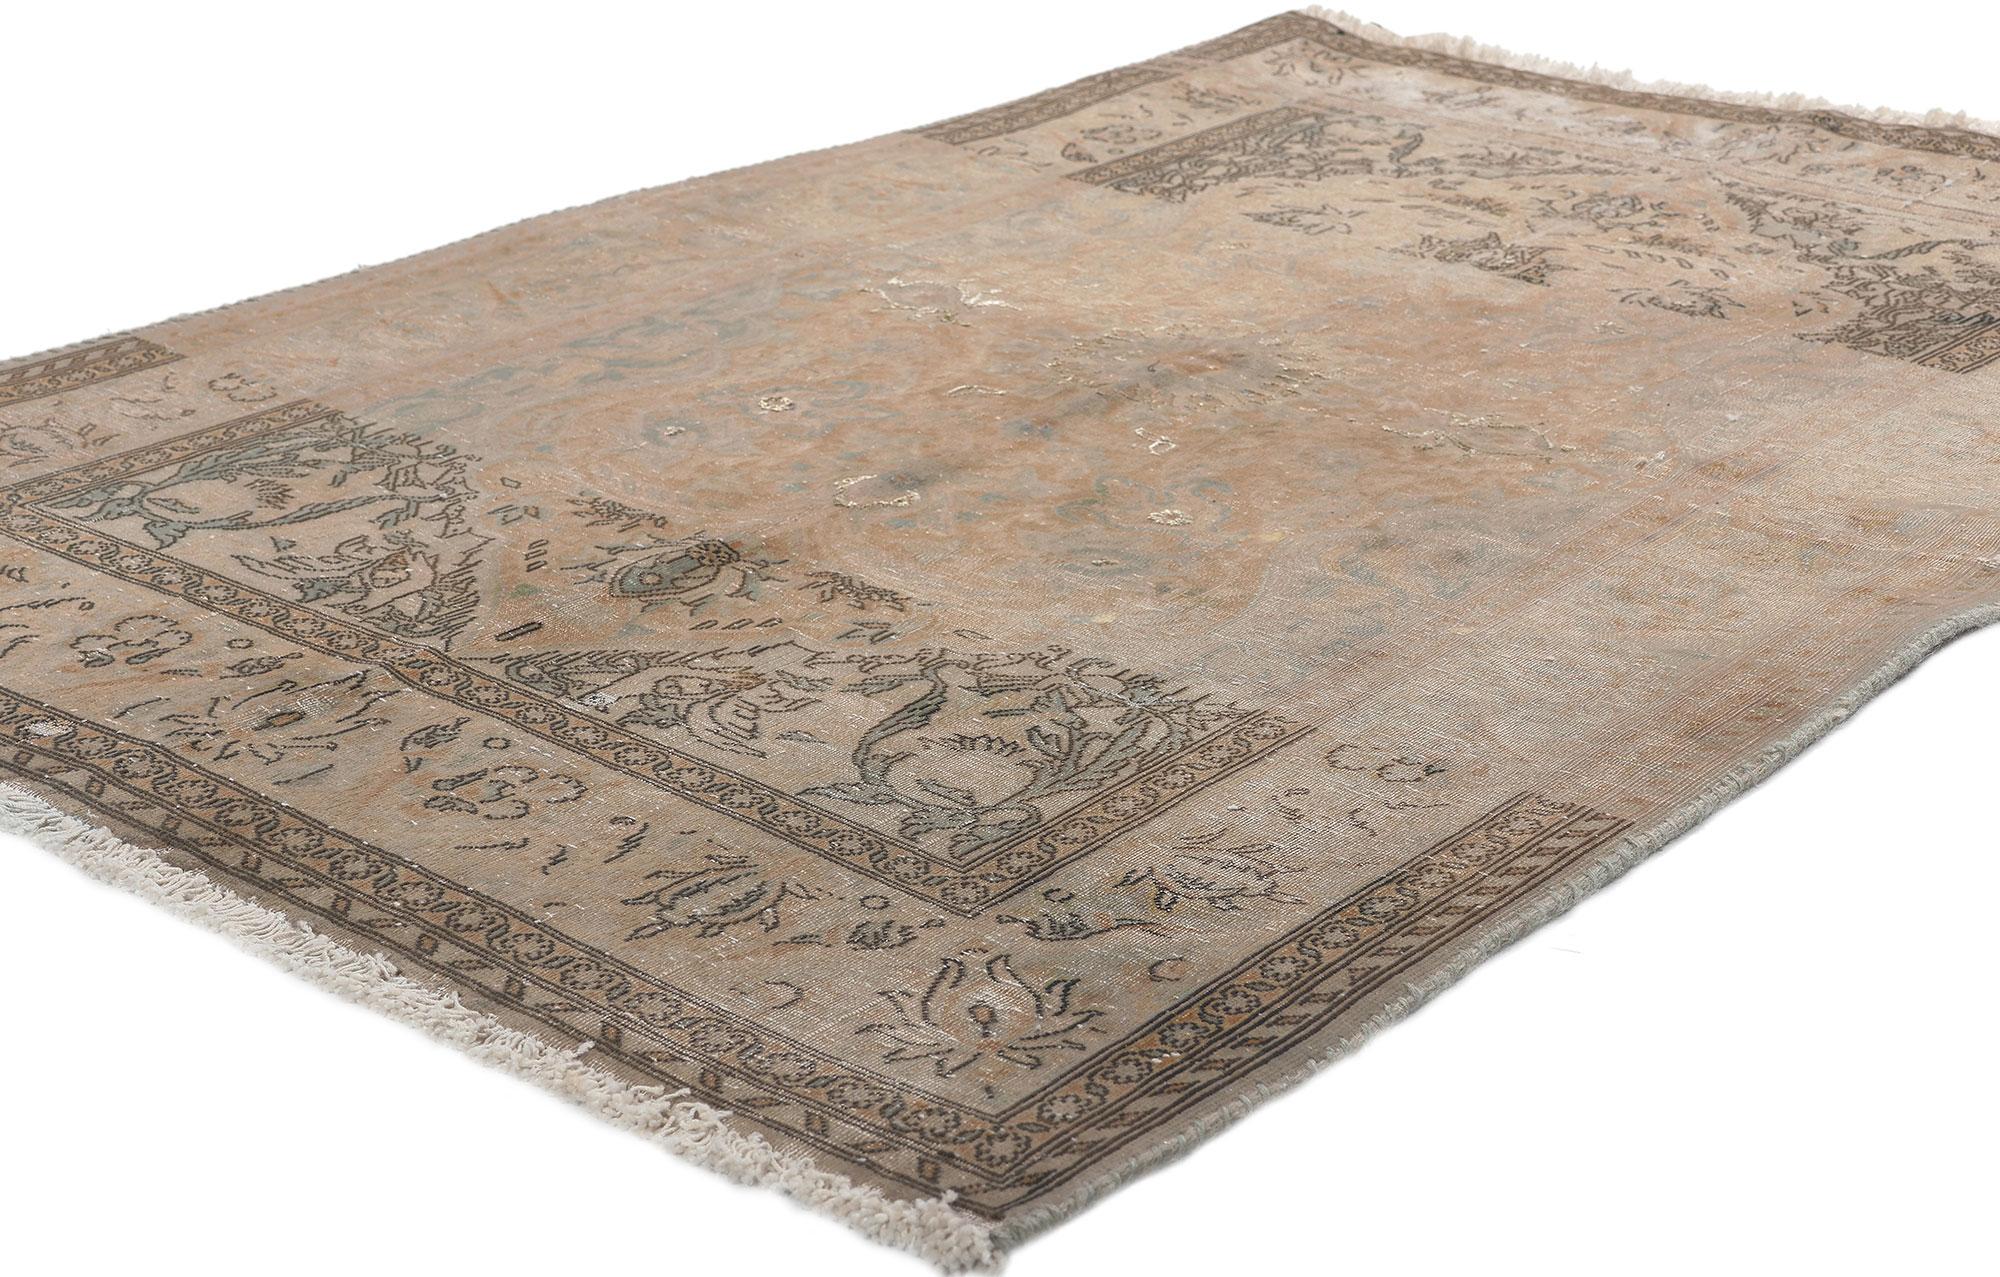 78574 Distressed Vintage Persian Kashan Rug, 03'05 x 05'03.
Warm and spicy earth-tones meets modern luxe in this distressed Persian Kashan rug. The vintage charm and earthy colorway woven into this piece work together creating a truly one-of-a-kind